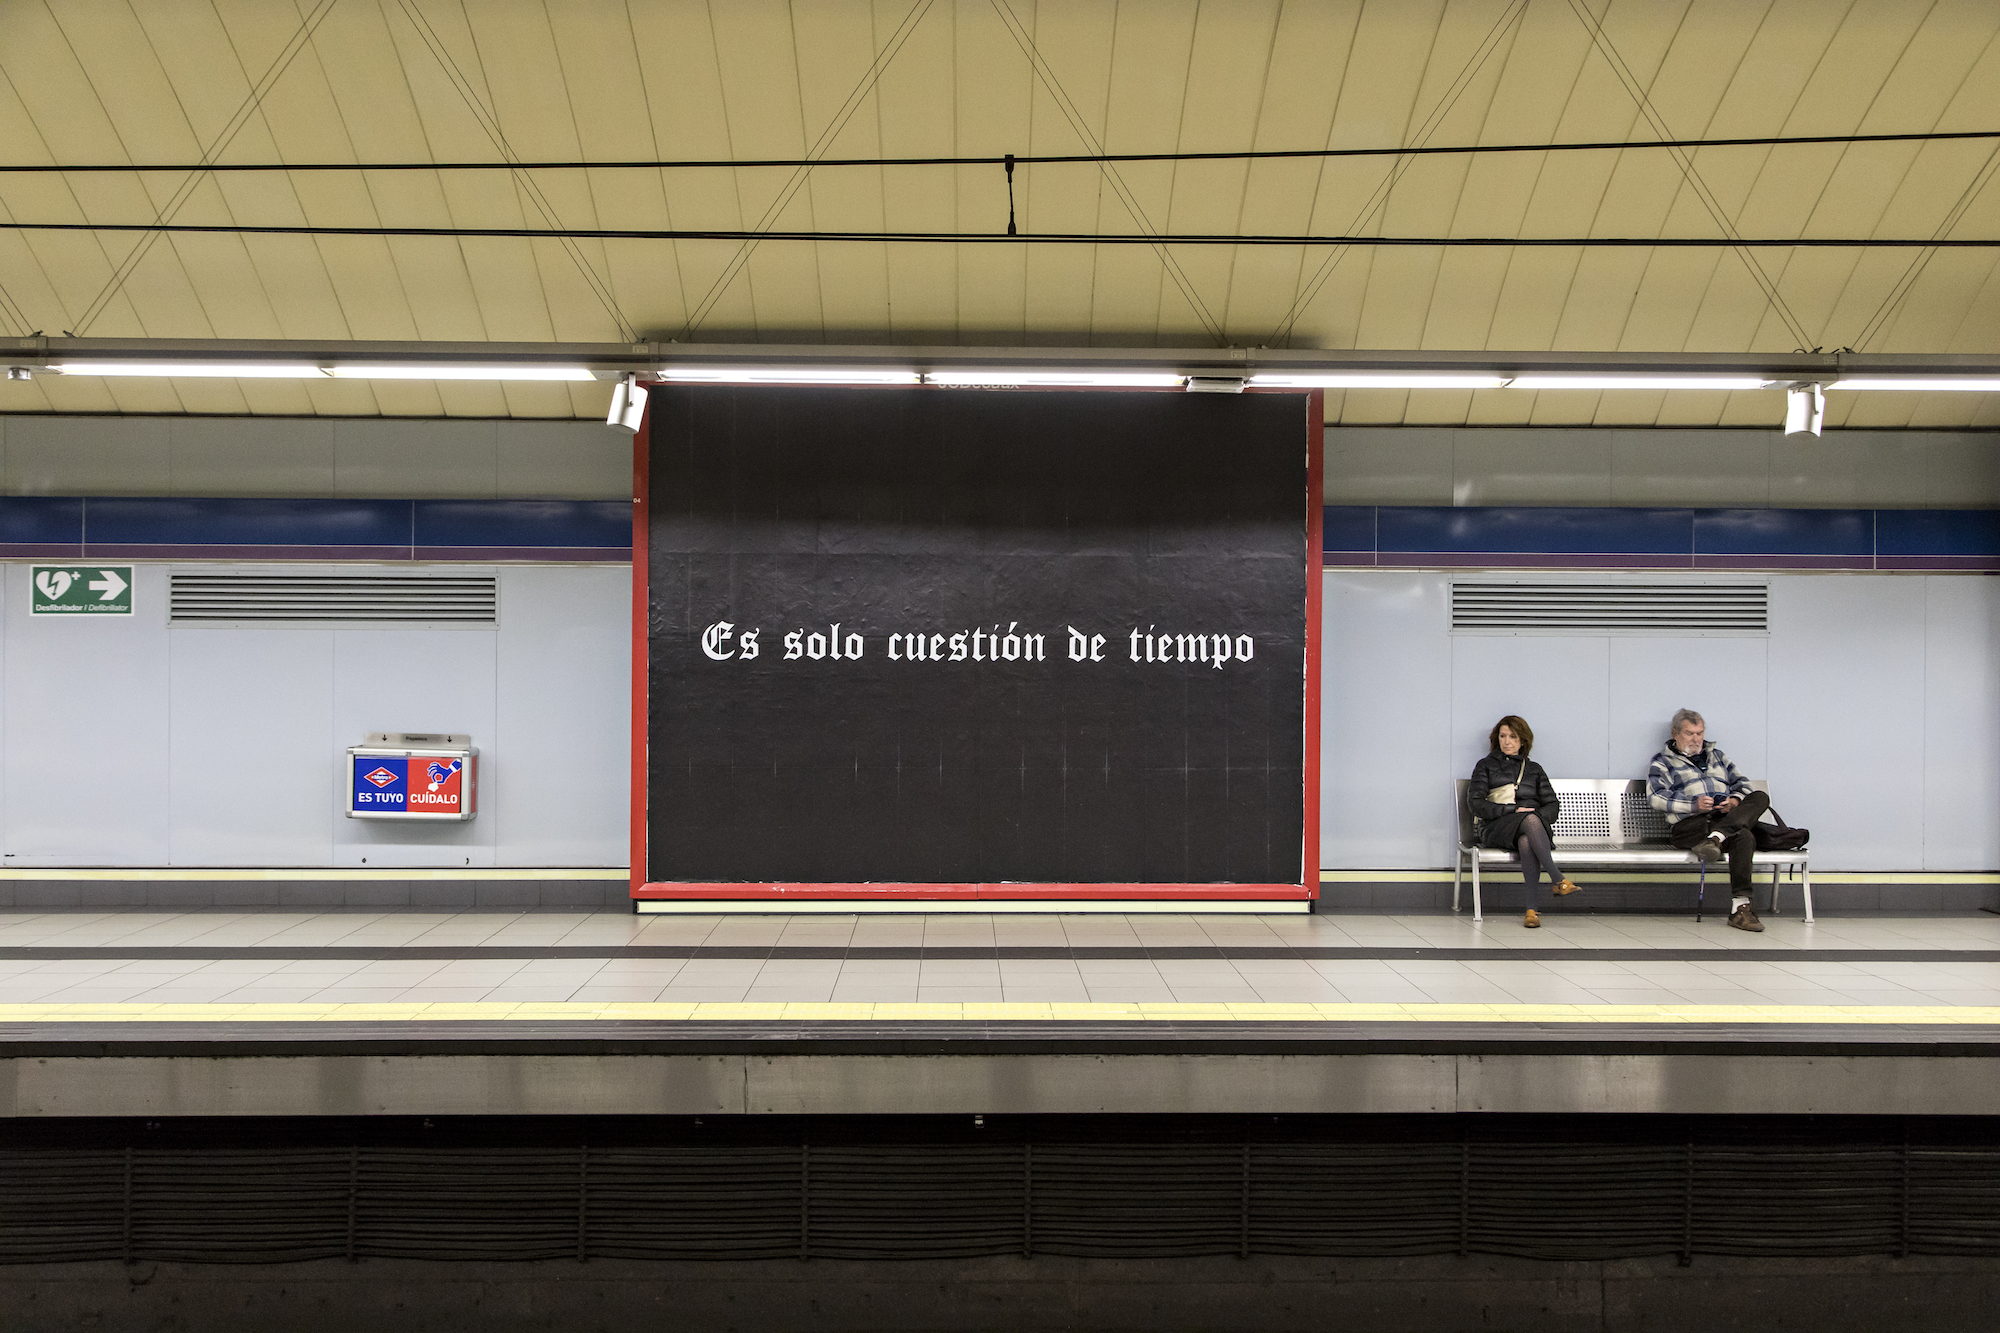 Inside a train station in which two bystanders are siting on opposite sides of a bench. To the left of the bench is a square wall displaying the phrase 